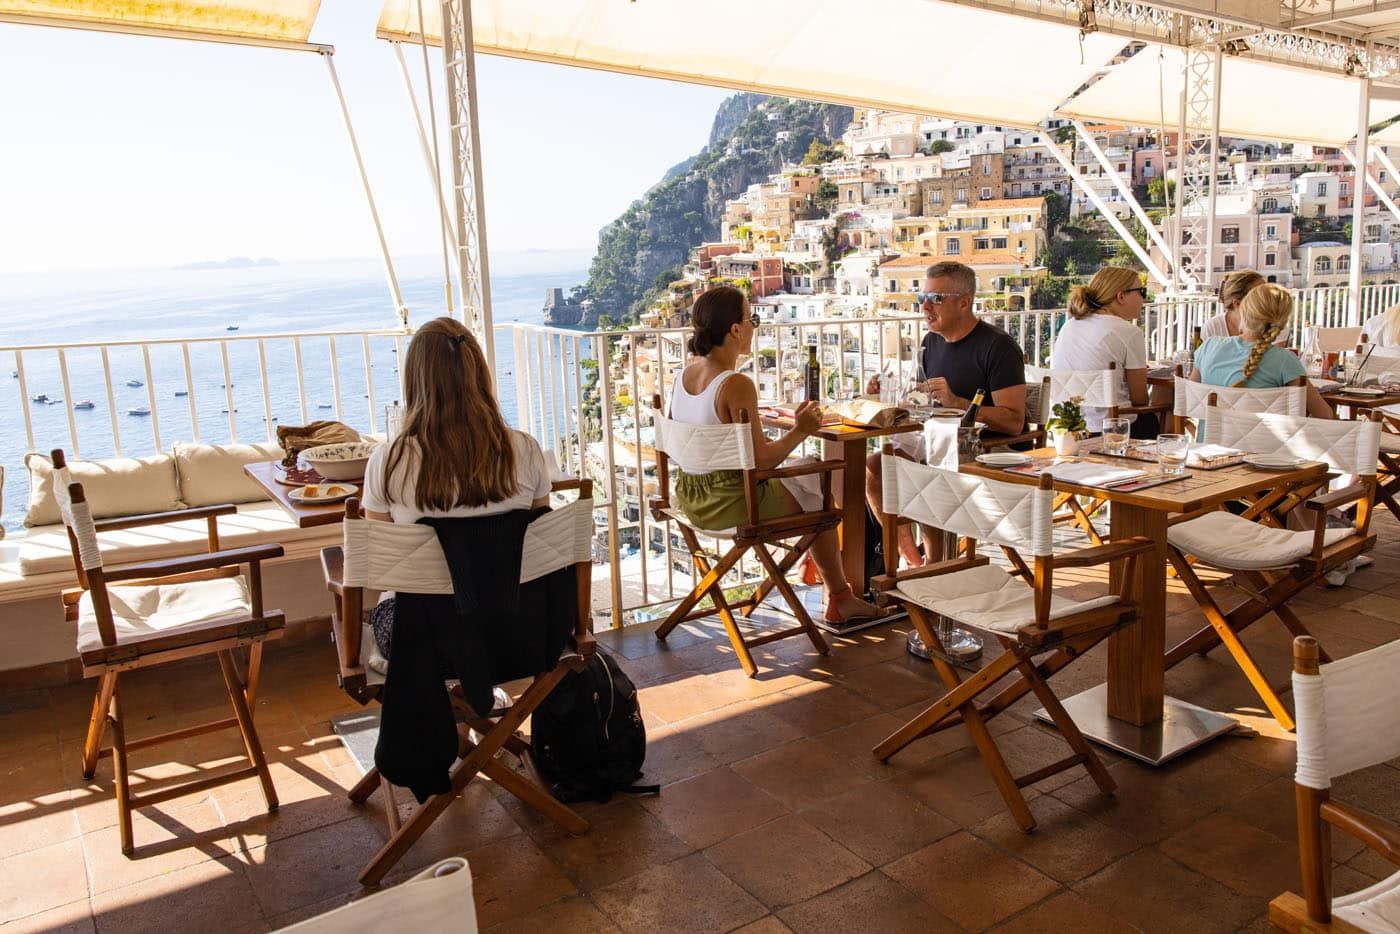 Where to Eat in Positano